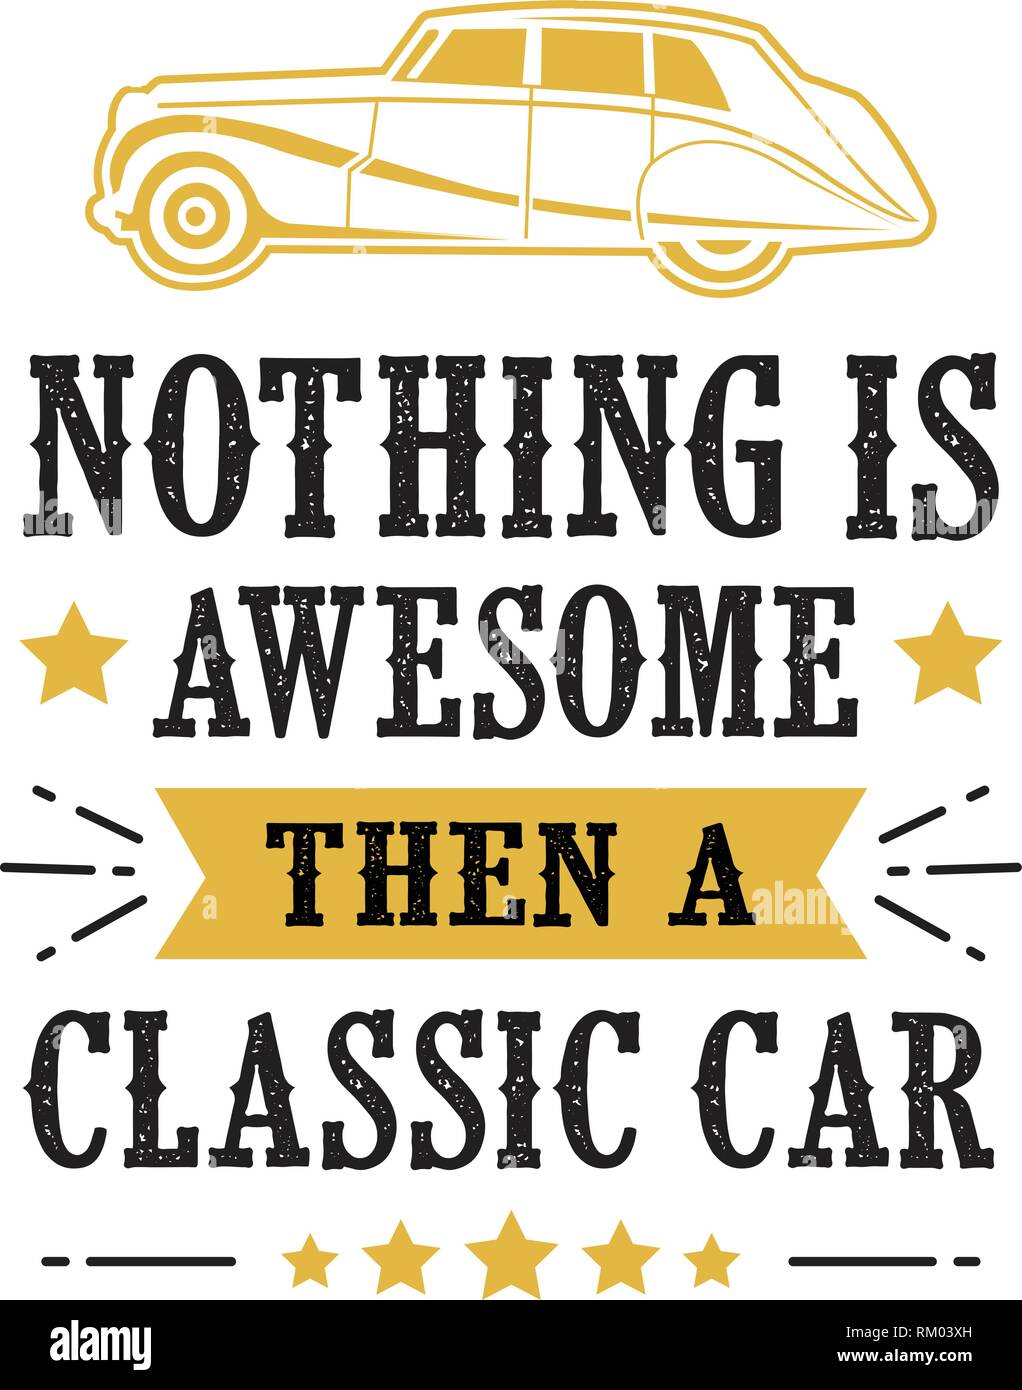 awesome car quotes